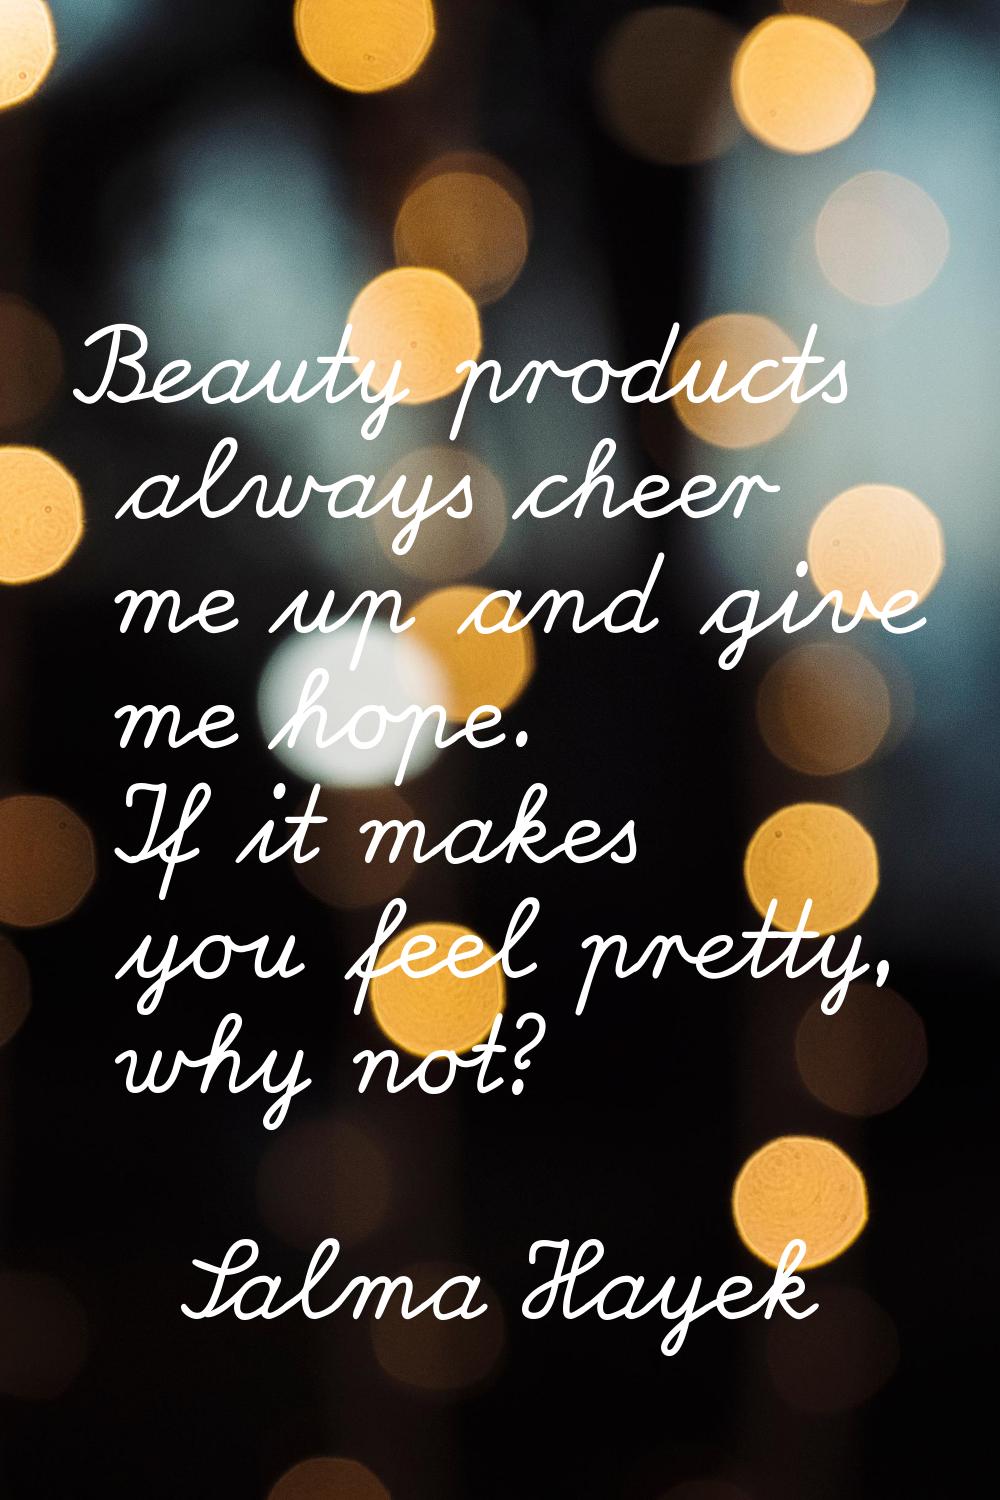 Beauty products always cheer me up and give me hope. If it makes you feel pretty, why not?